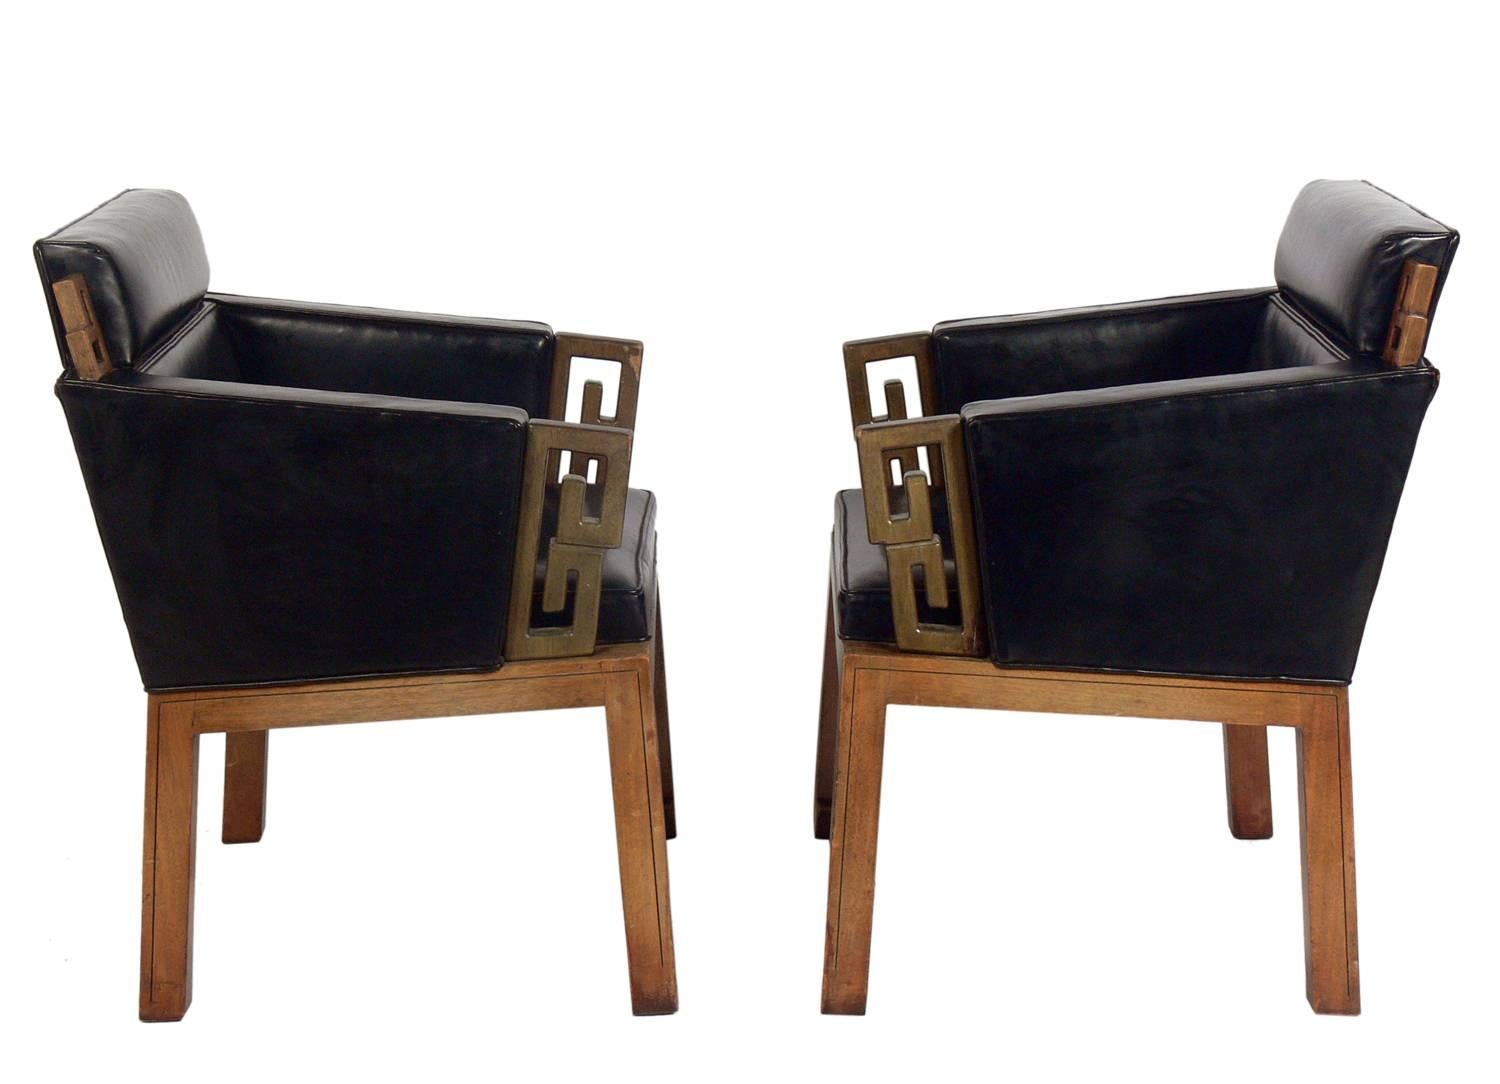 Pair of Asian influenced leather lounge chairs, attributed to James Mont, American, circa 1950s.